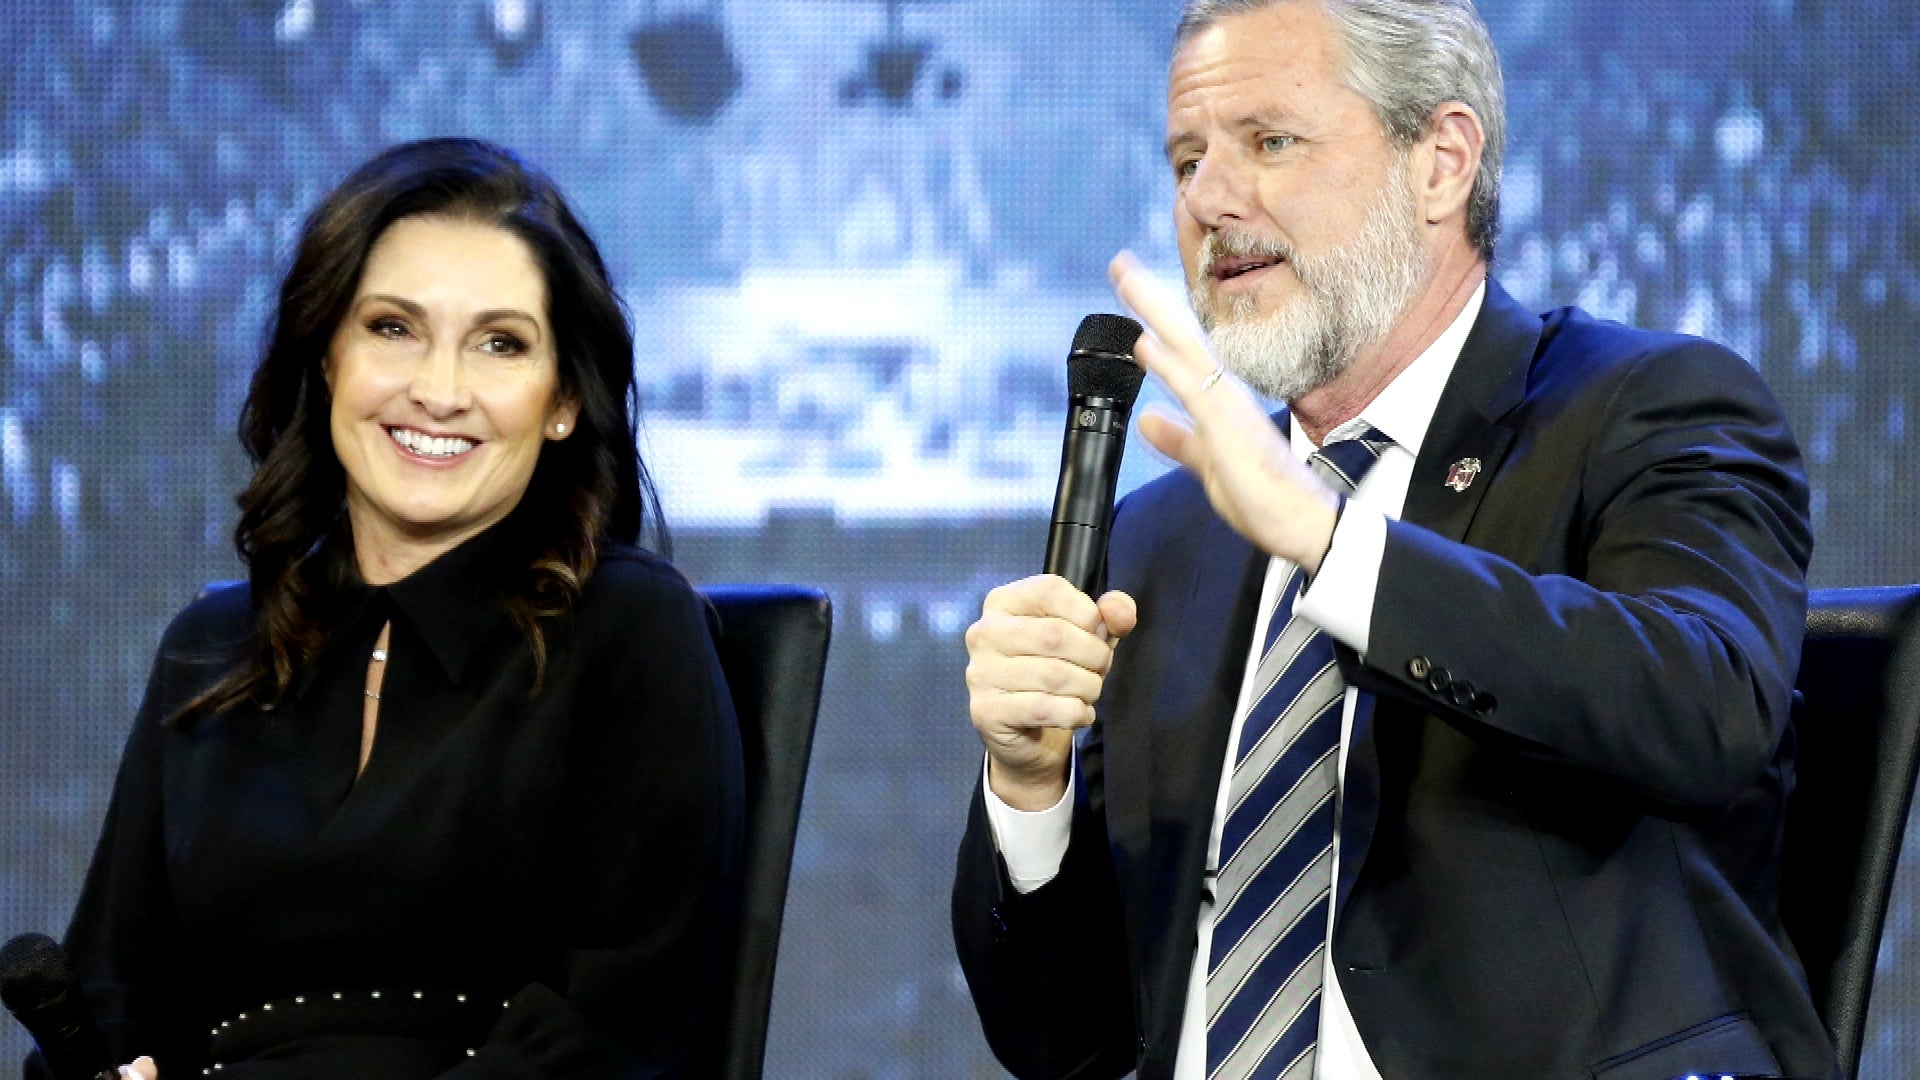 Becki Falwell, Wife of Evangelical Leader Jerry Falwell Jr., Details Affair With Pool Boy in New Interview Inside Edition